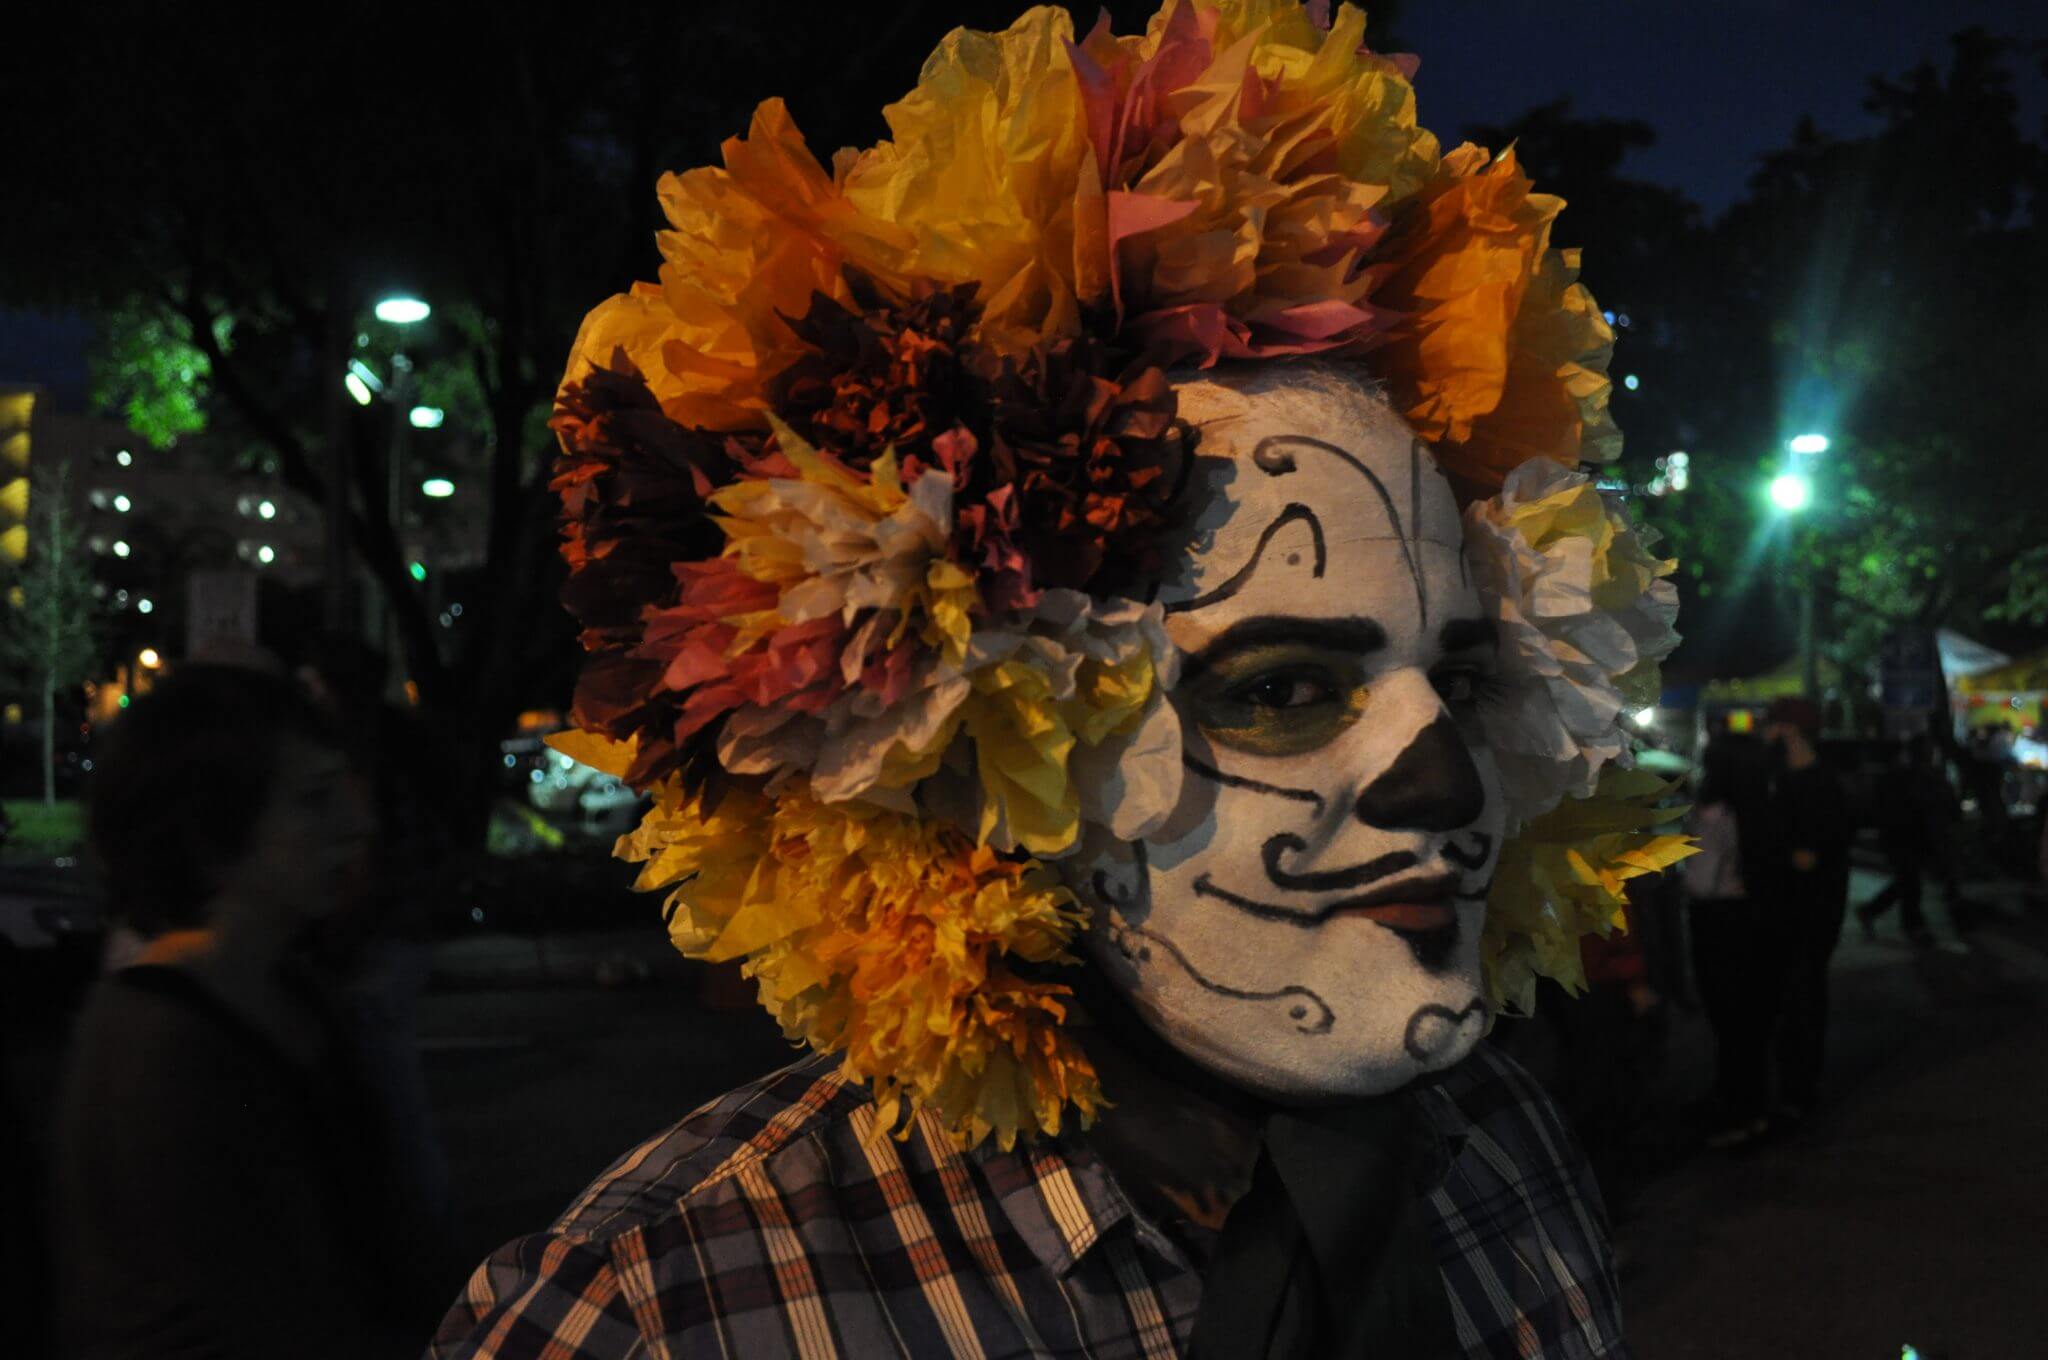 Florida Day of the Dead, November 2nd in Downtown Ft. Lauderdale - www.HuntingforRubies